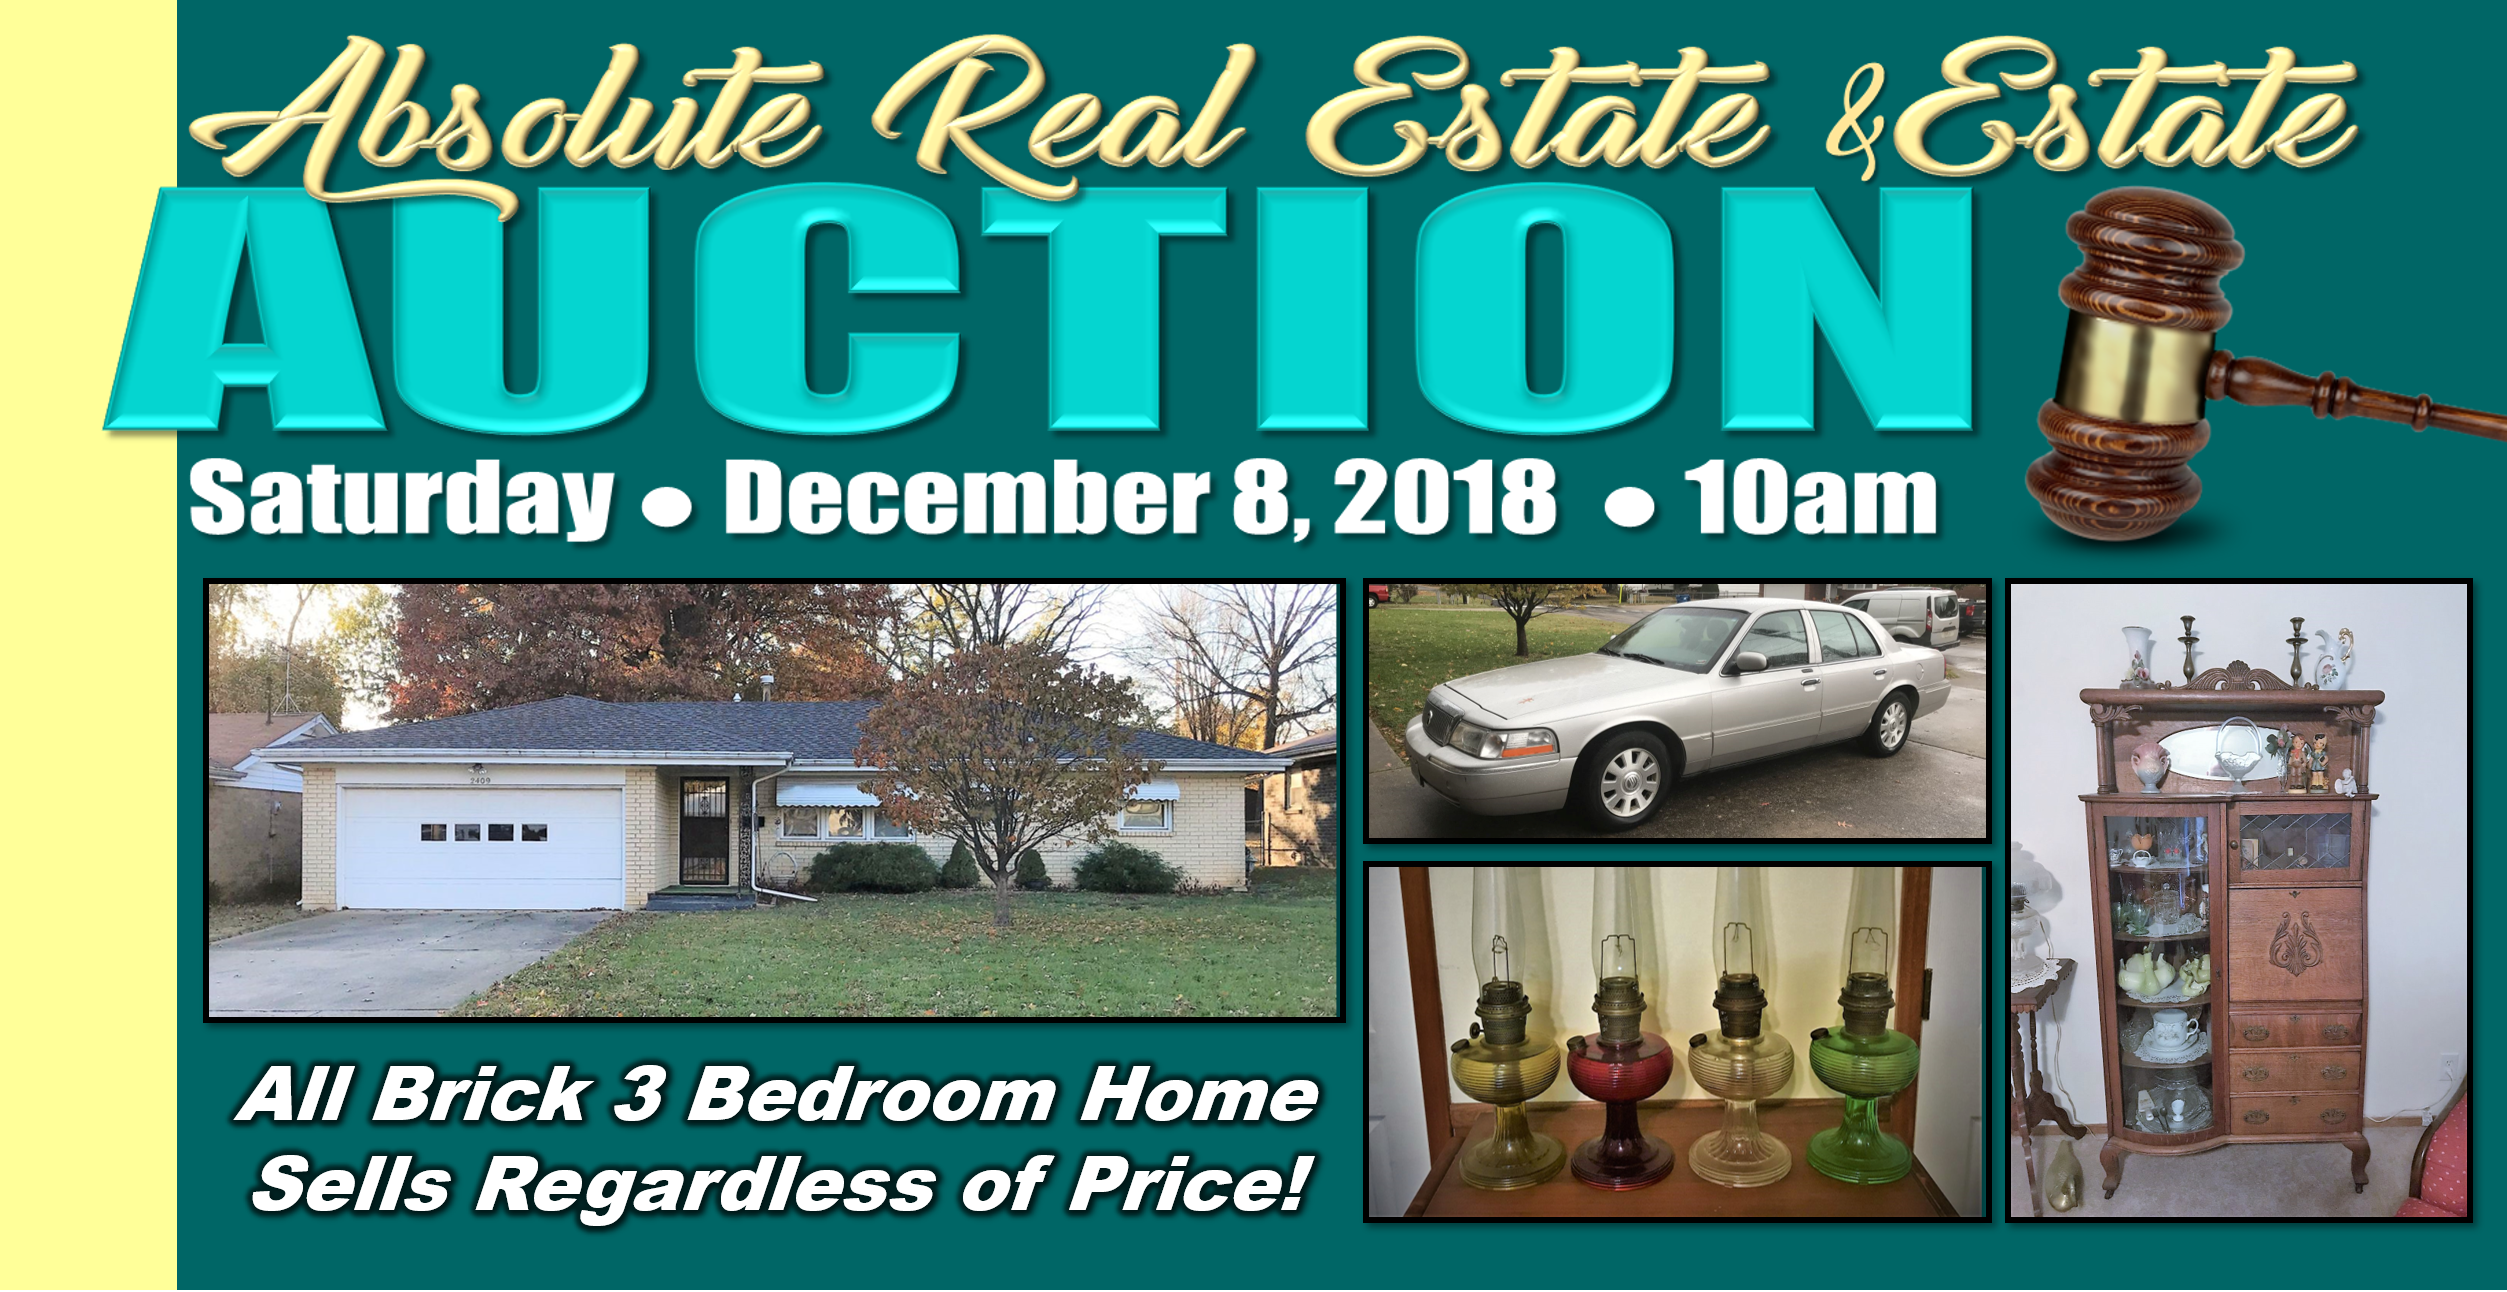 Absolute Real Estate & Estate Auction